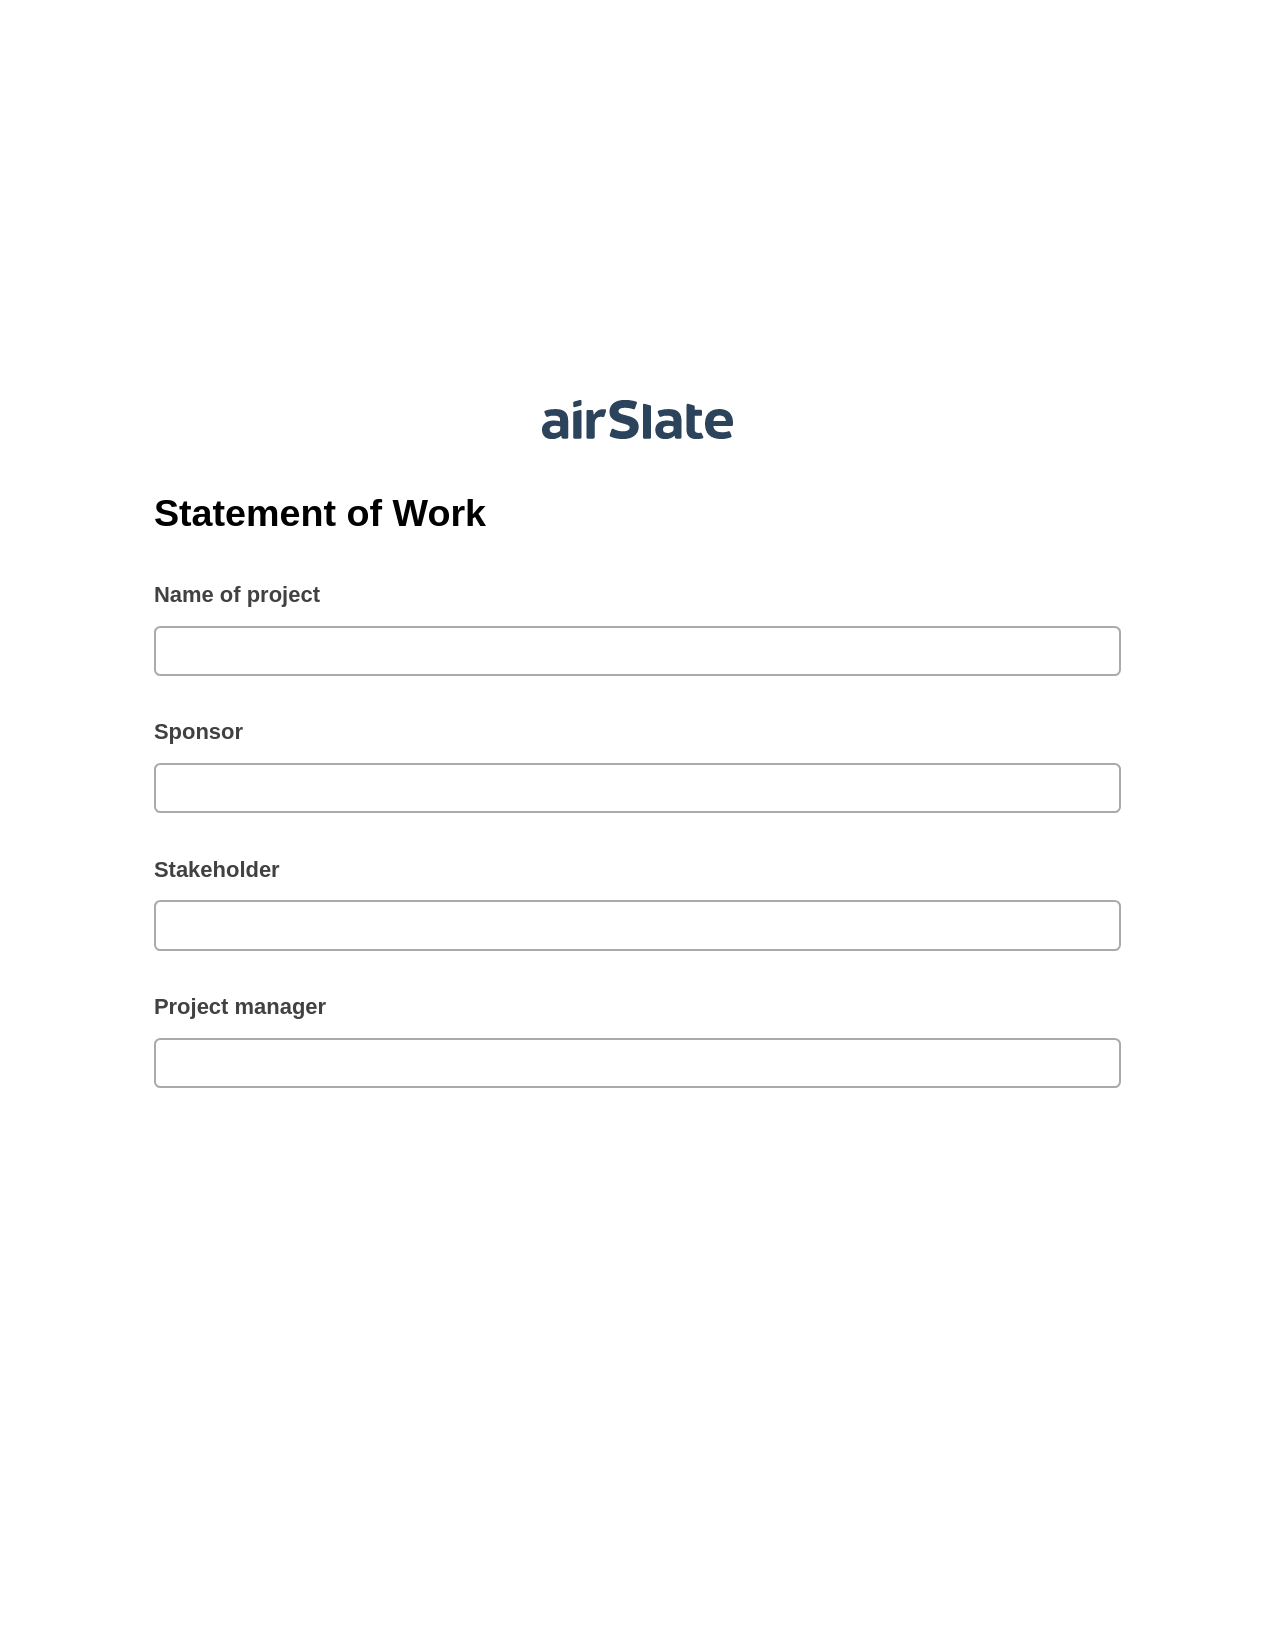 Statement of Work Pre-fill Document Bot, Webhook Bot, Export to Salesforce Bot